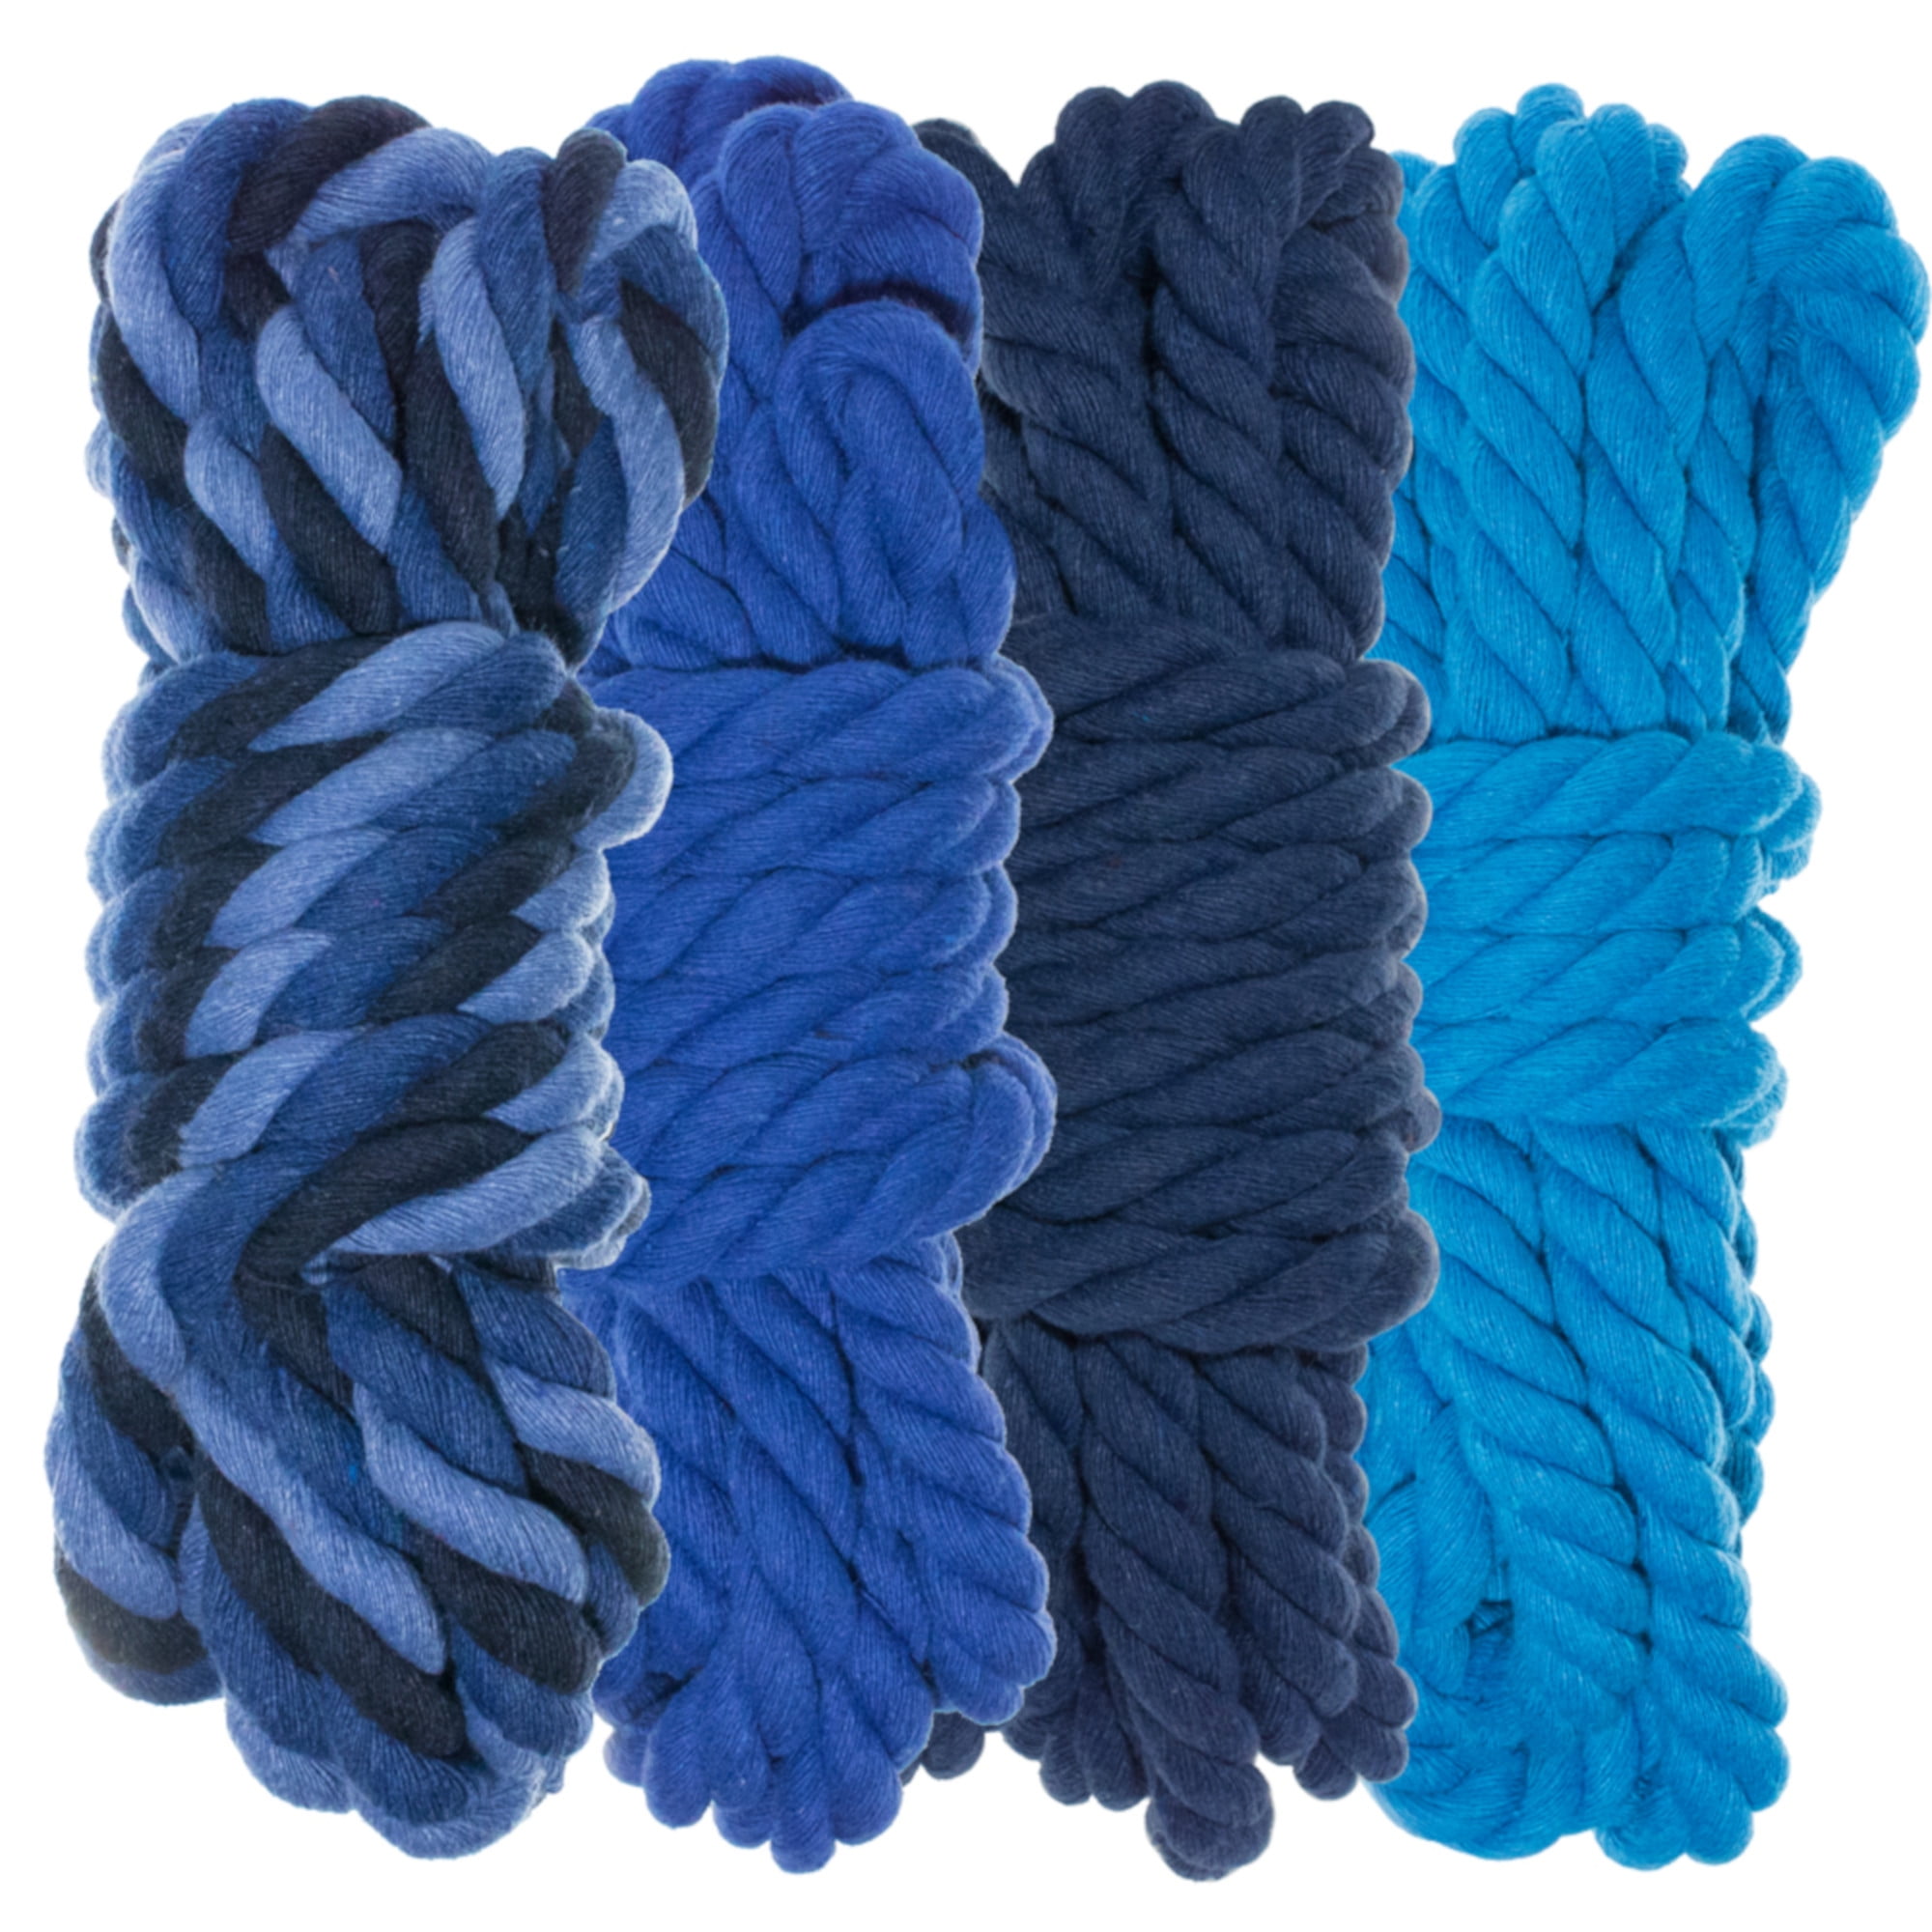 Twisted 3 Strand Natural Cotton Rope 40 and 100 Foot Kits in 1/4